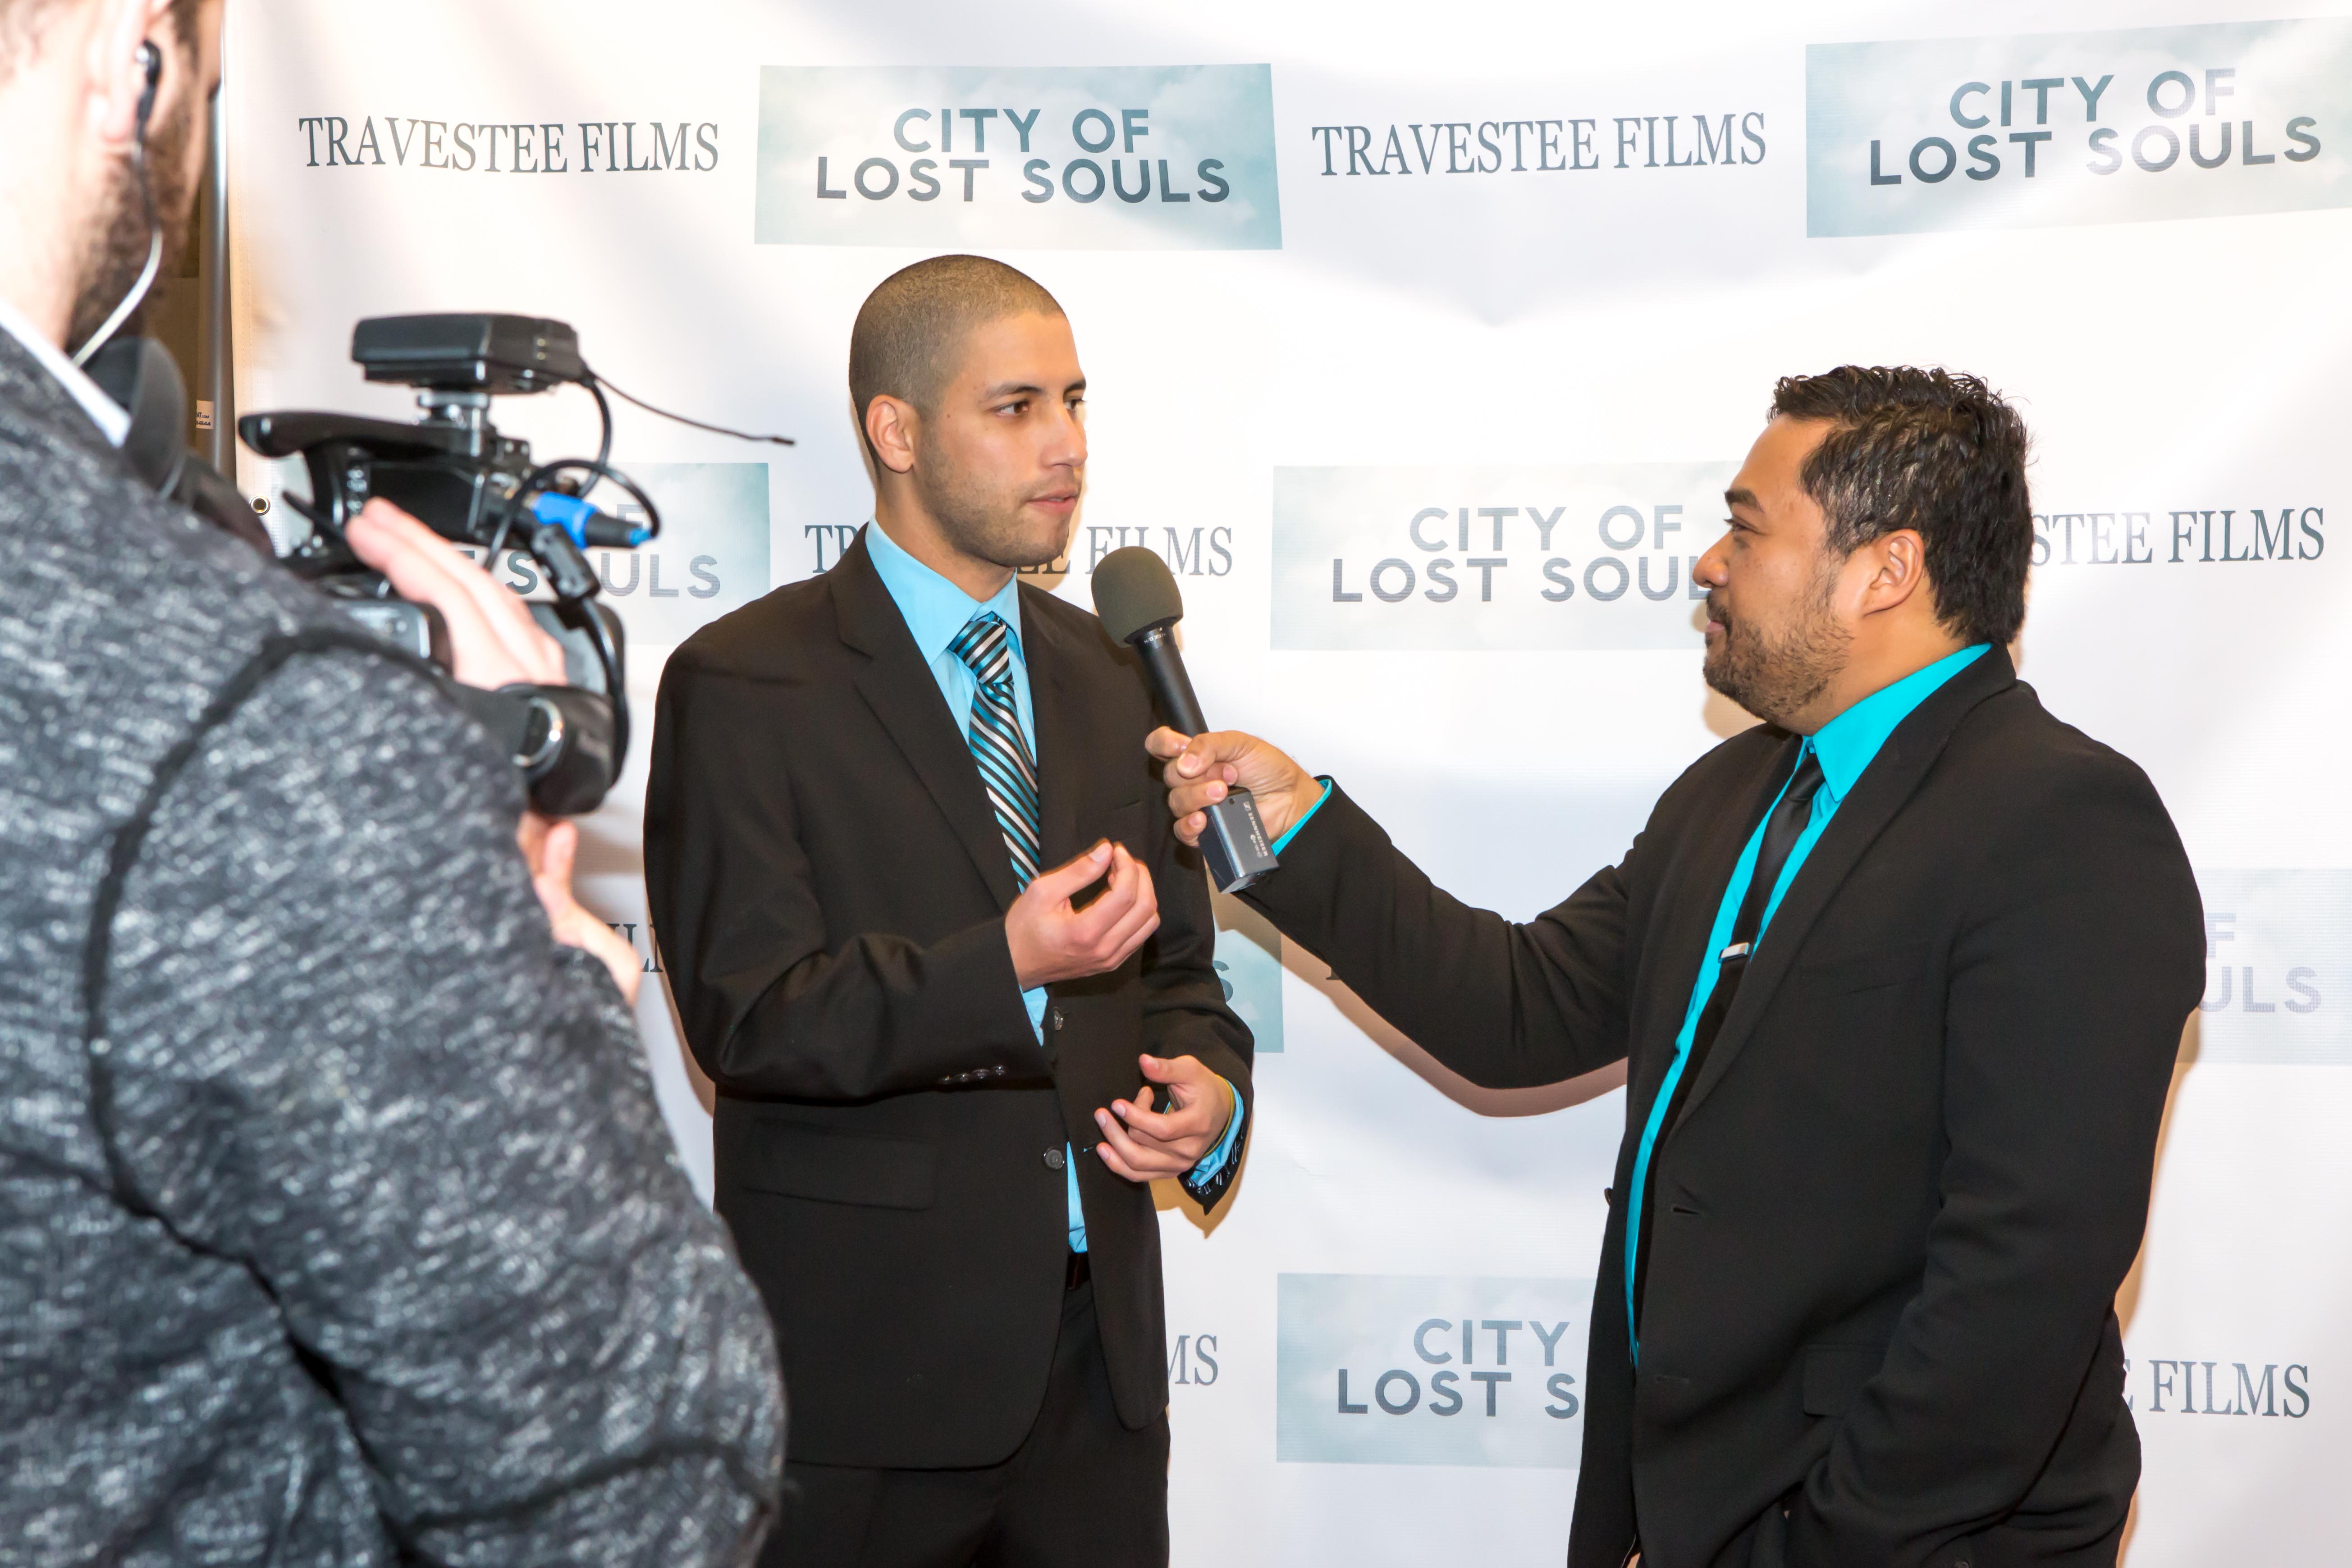 Director Jason Baustin getting interviewed at the premiere of 